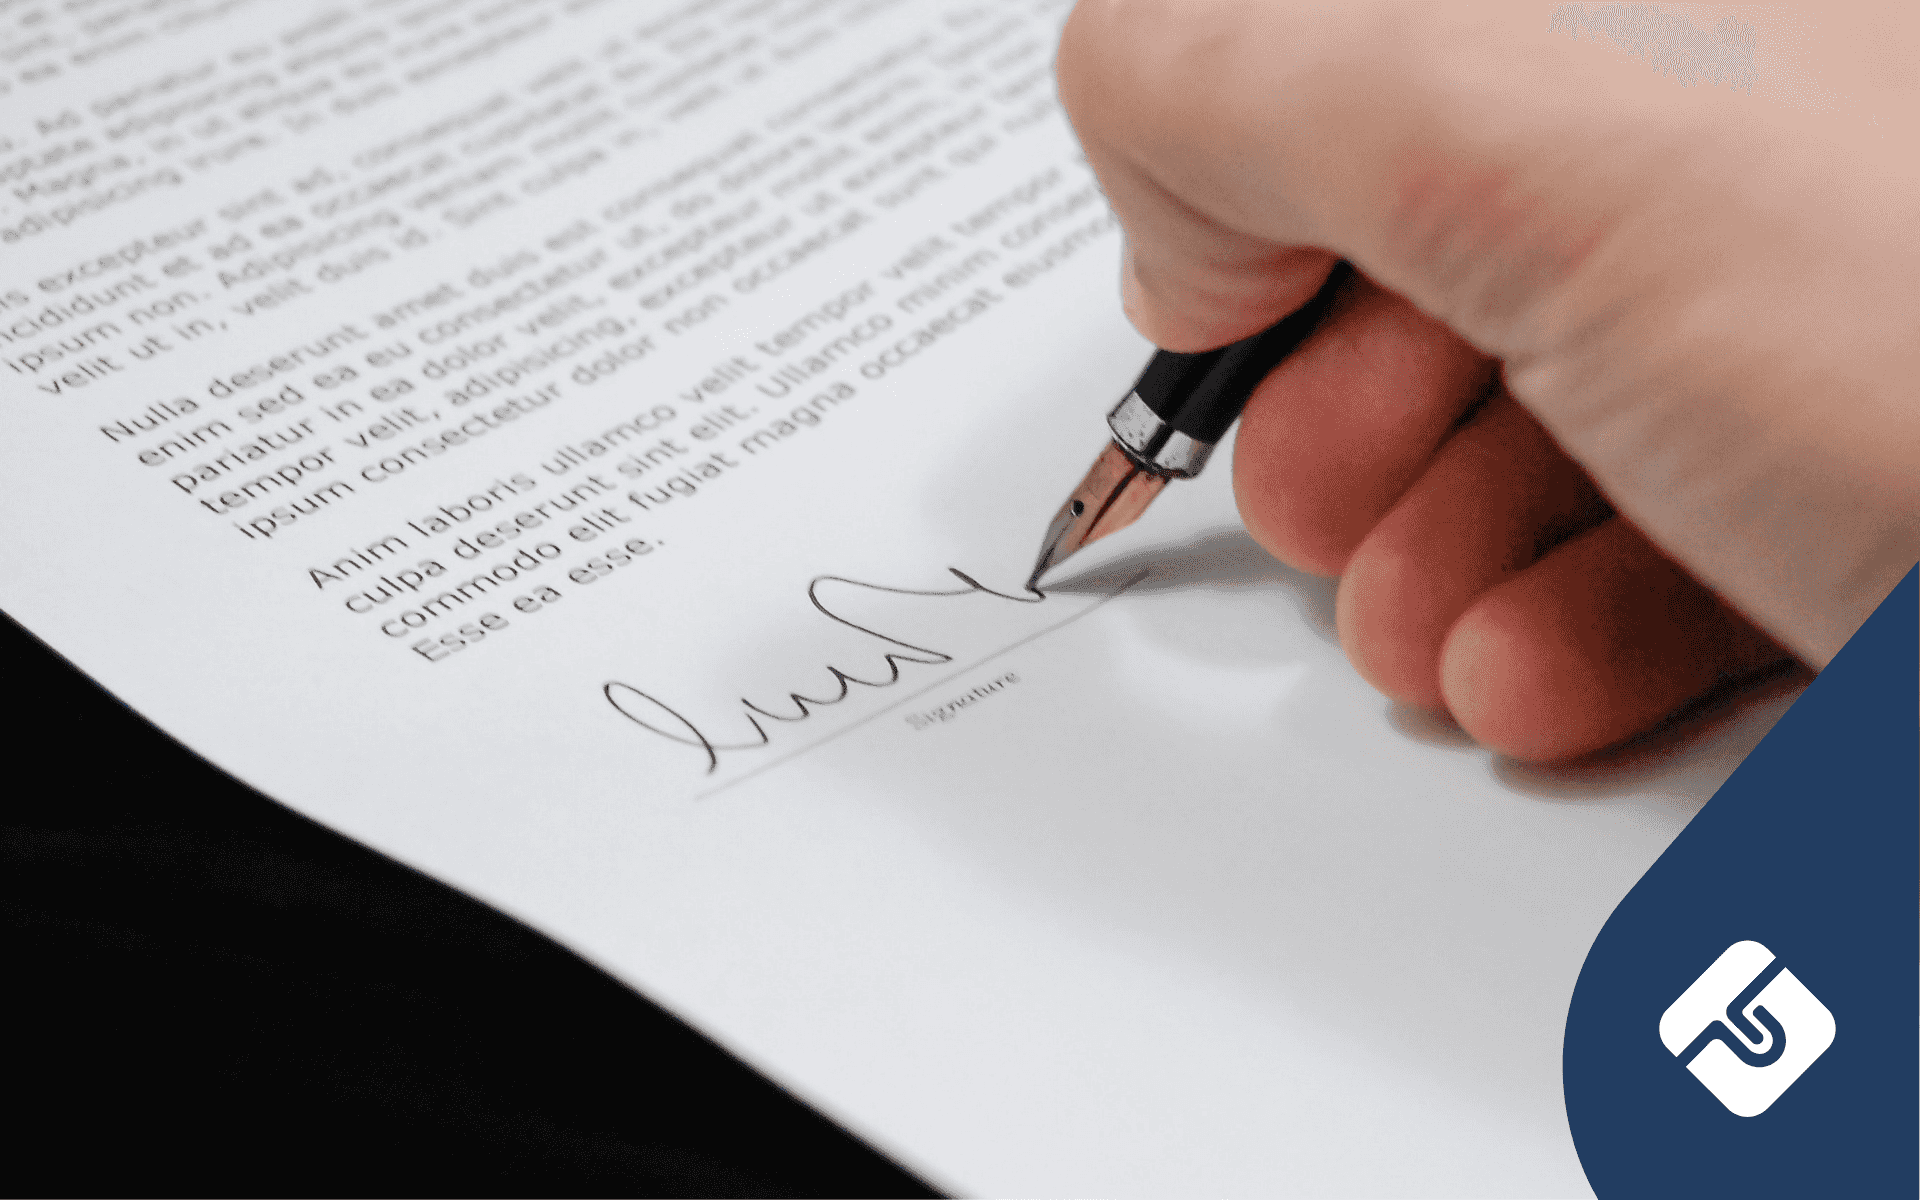 How to sign on someone else's behalf legally